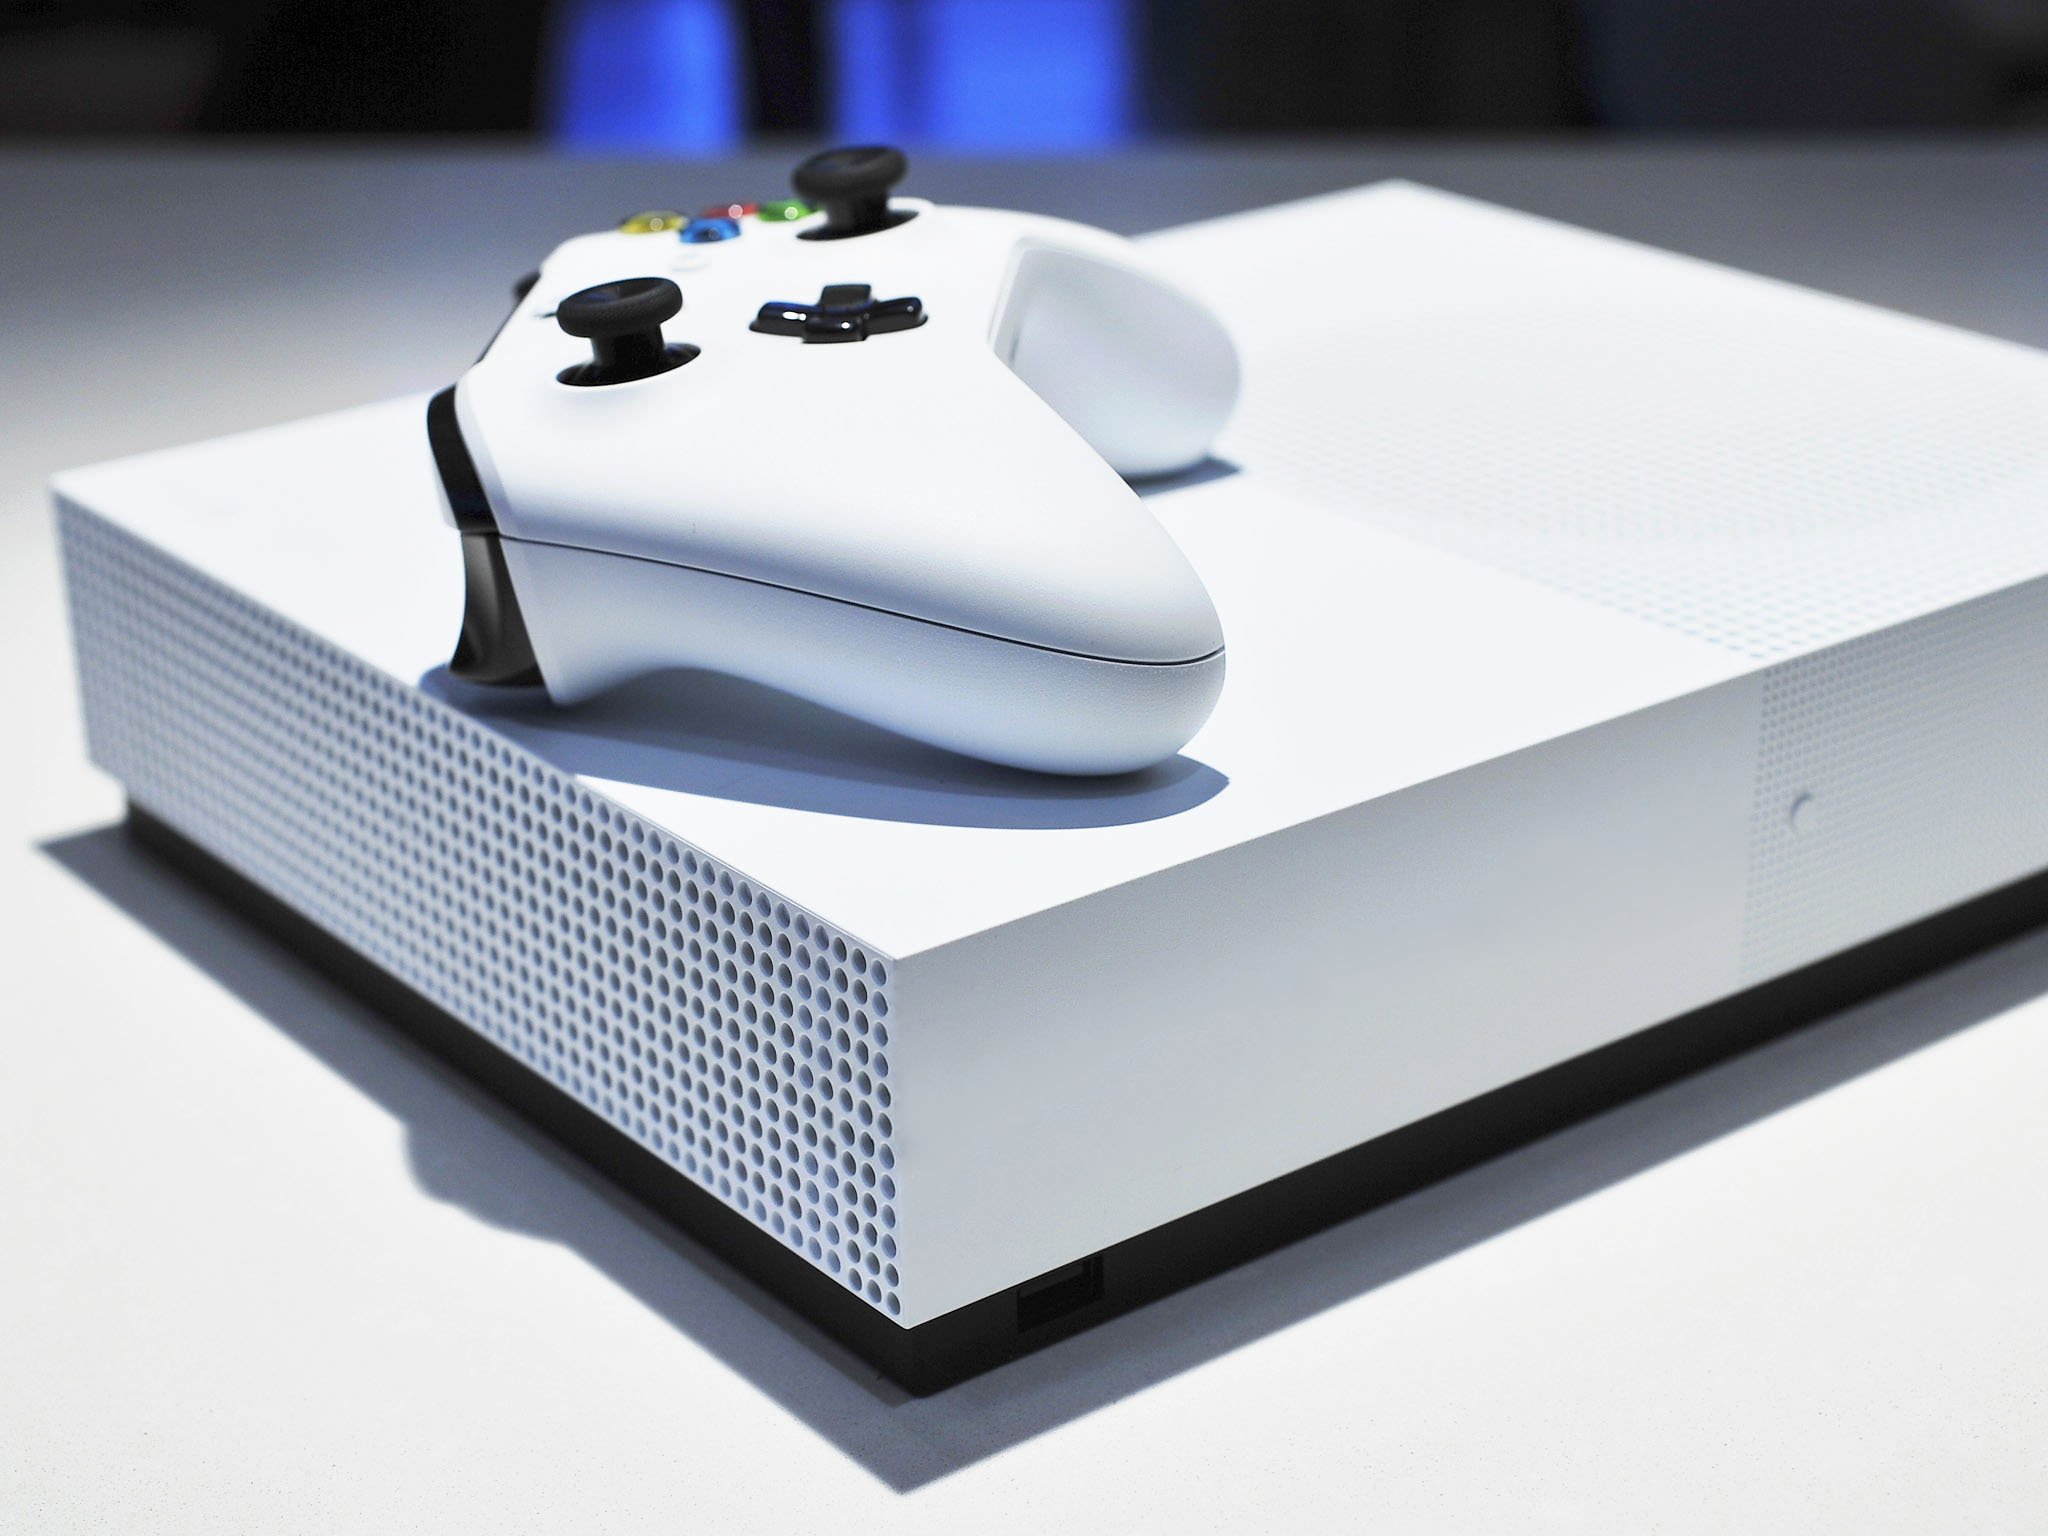 The Xbox One S All-Digital Edition is a natural step forward for Microsoft